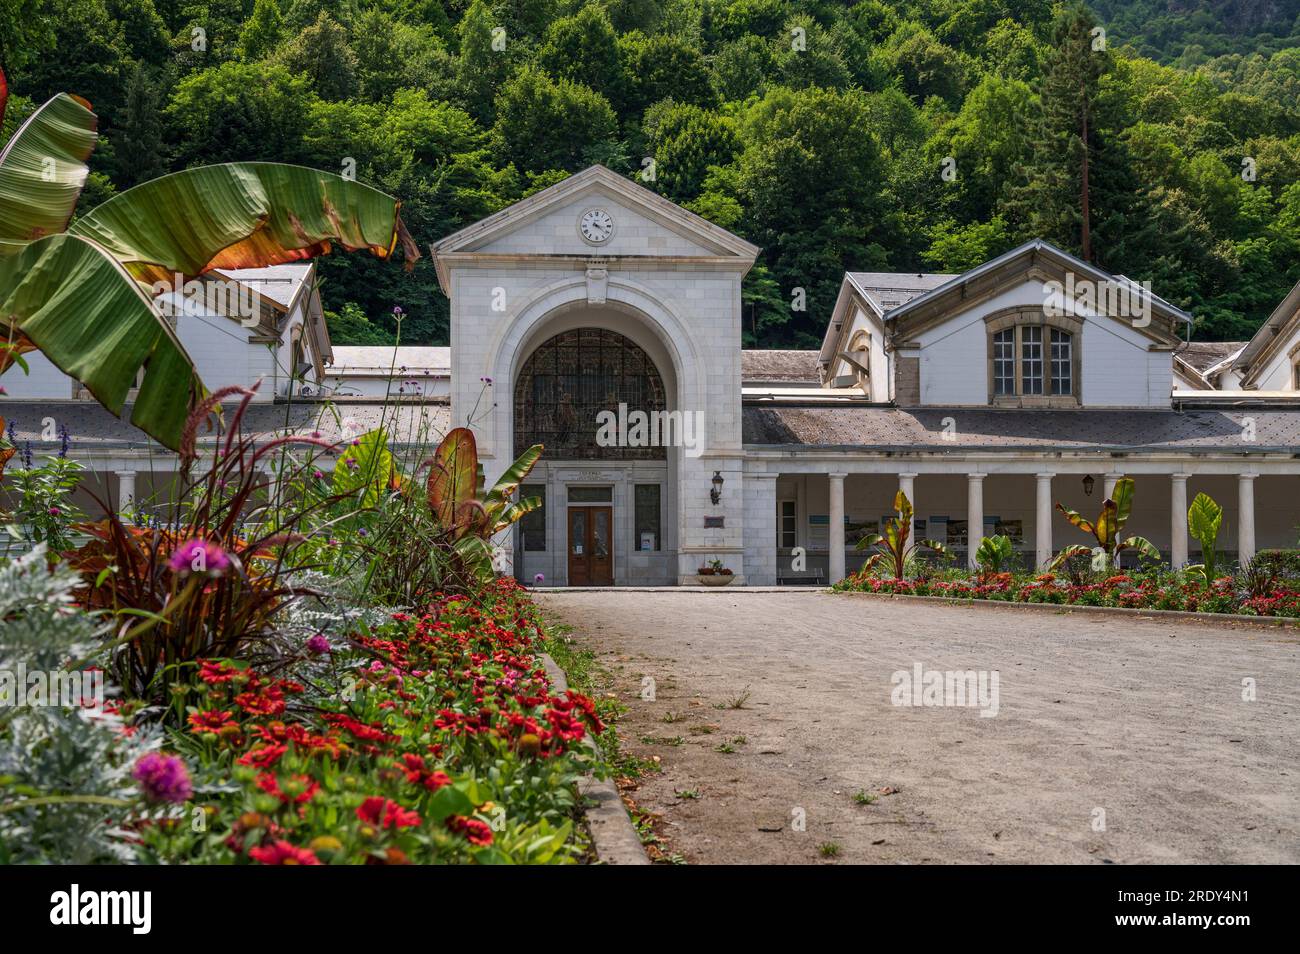 The thermal spa complex of Bagnères-de-Luchon boasts the strongest sulphuric sources in France. Stock Photo